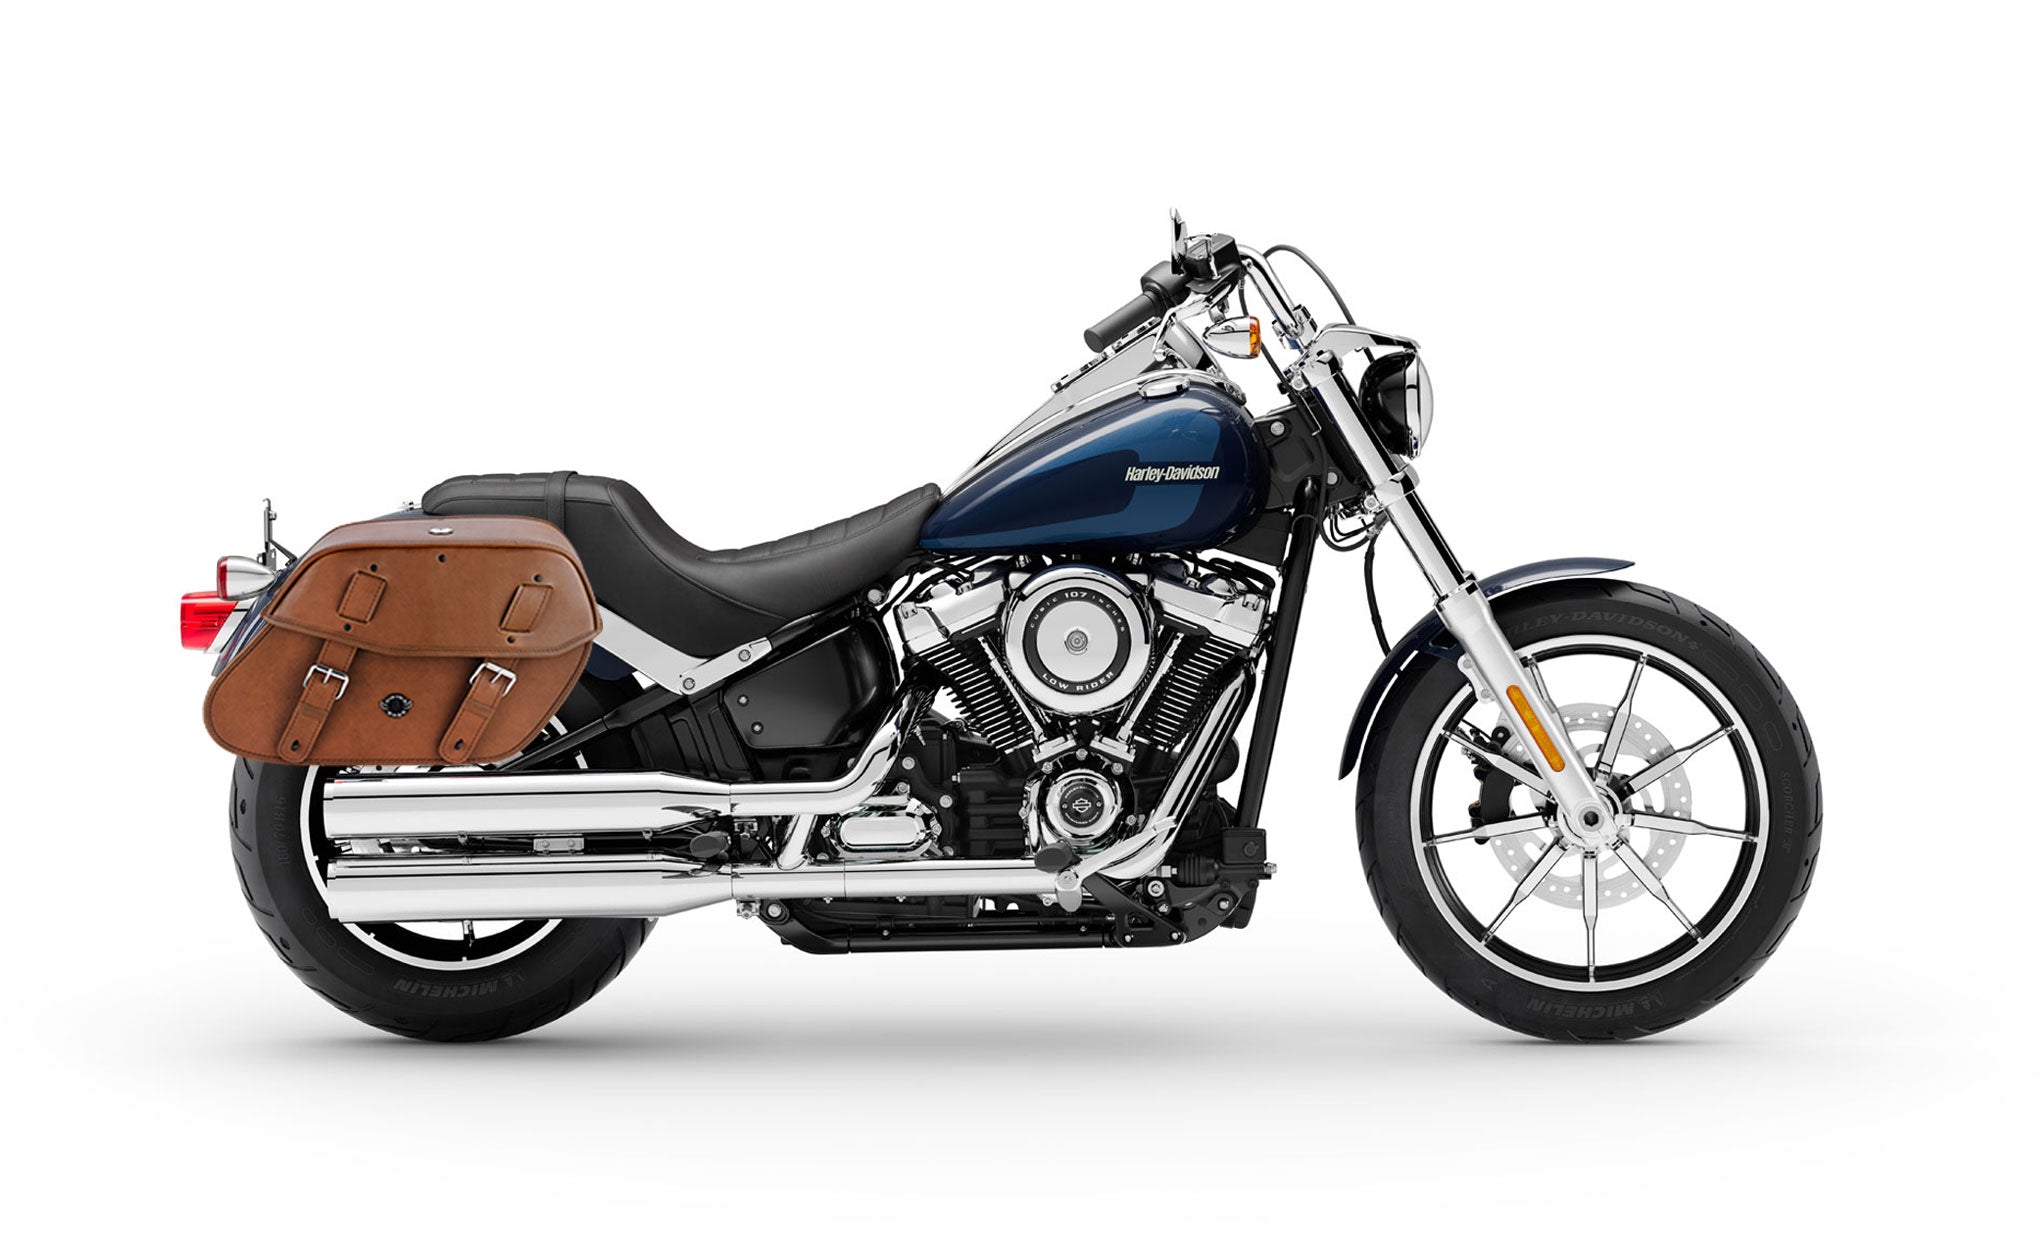 Viking Odin Brown Large Leather Motorcycle Saddlebags For Harley Softail Low Rider Fxlr on Bike Photo @expand